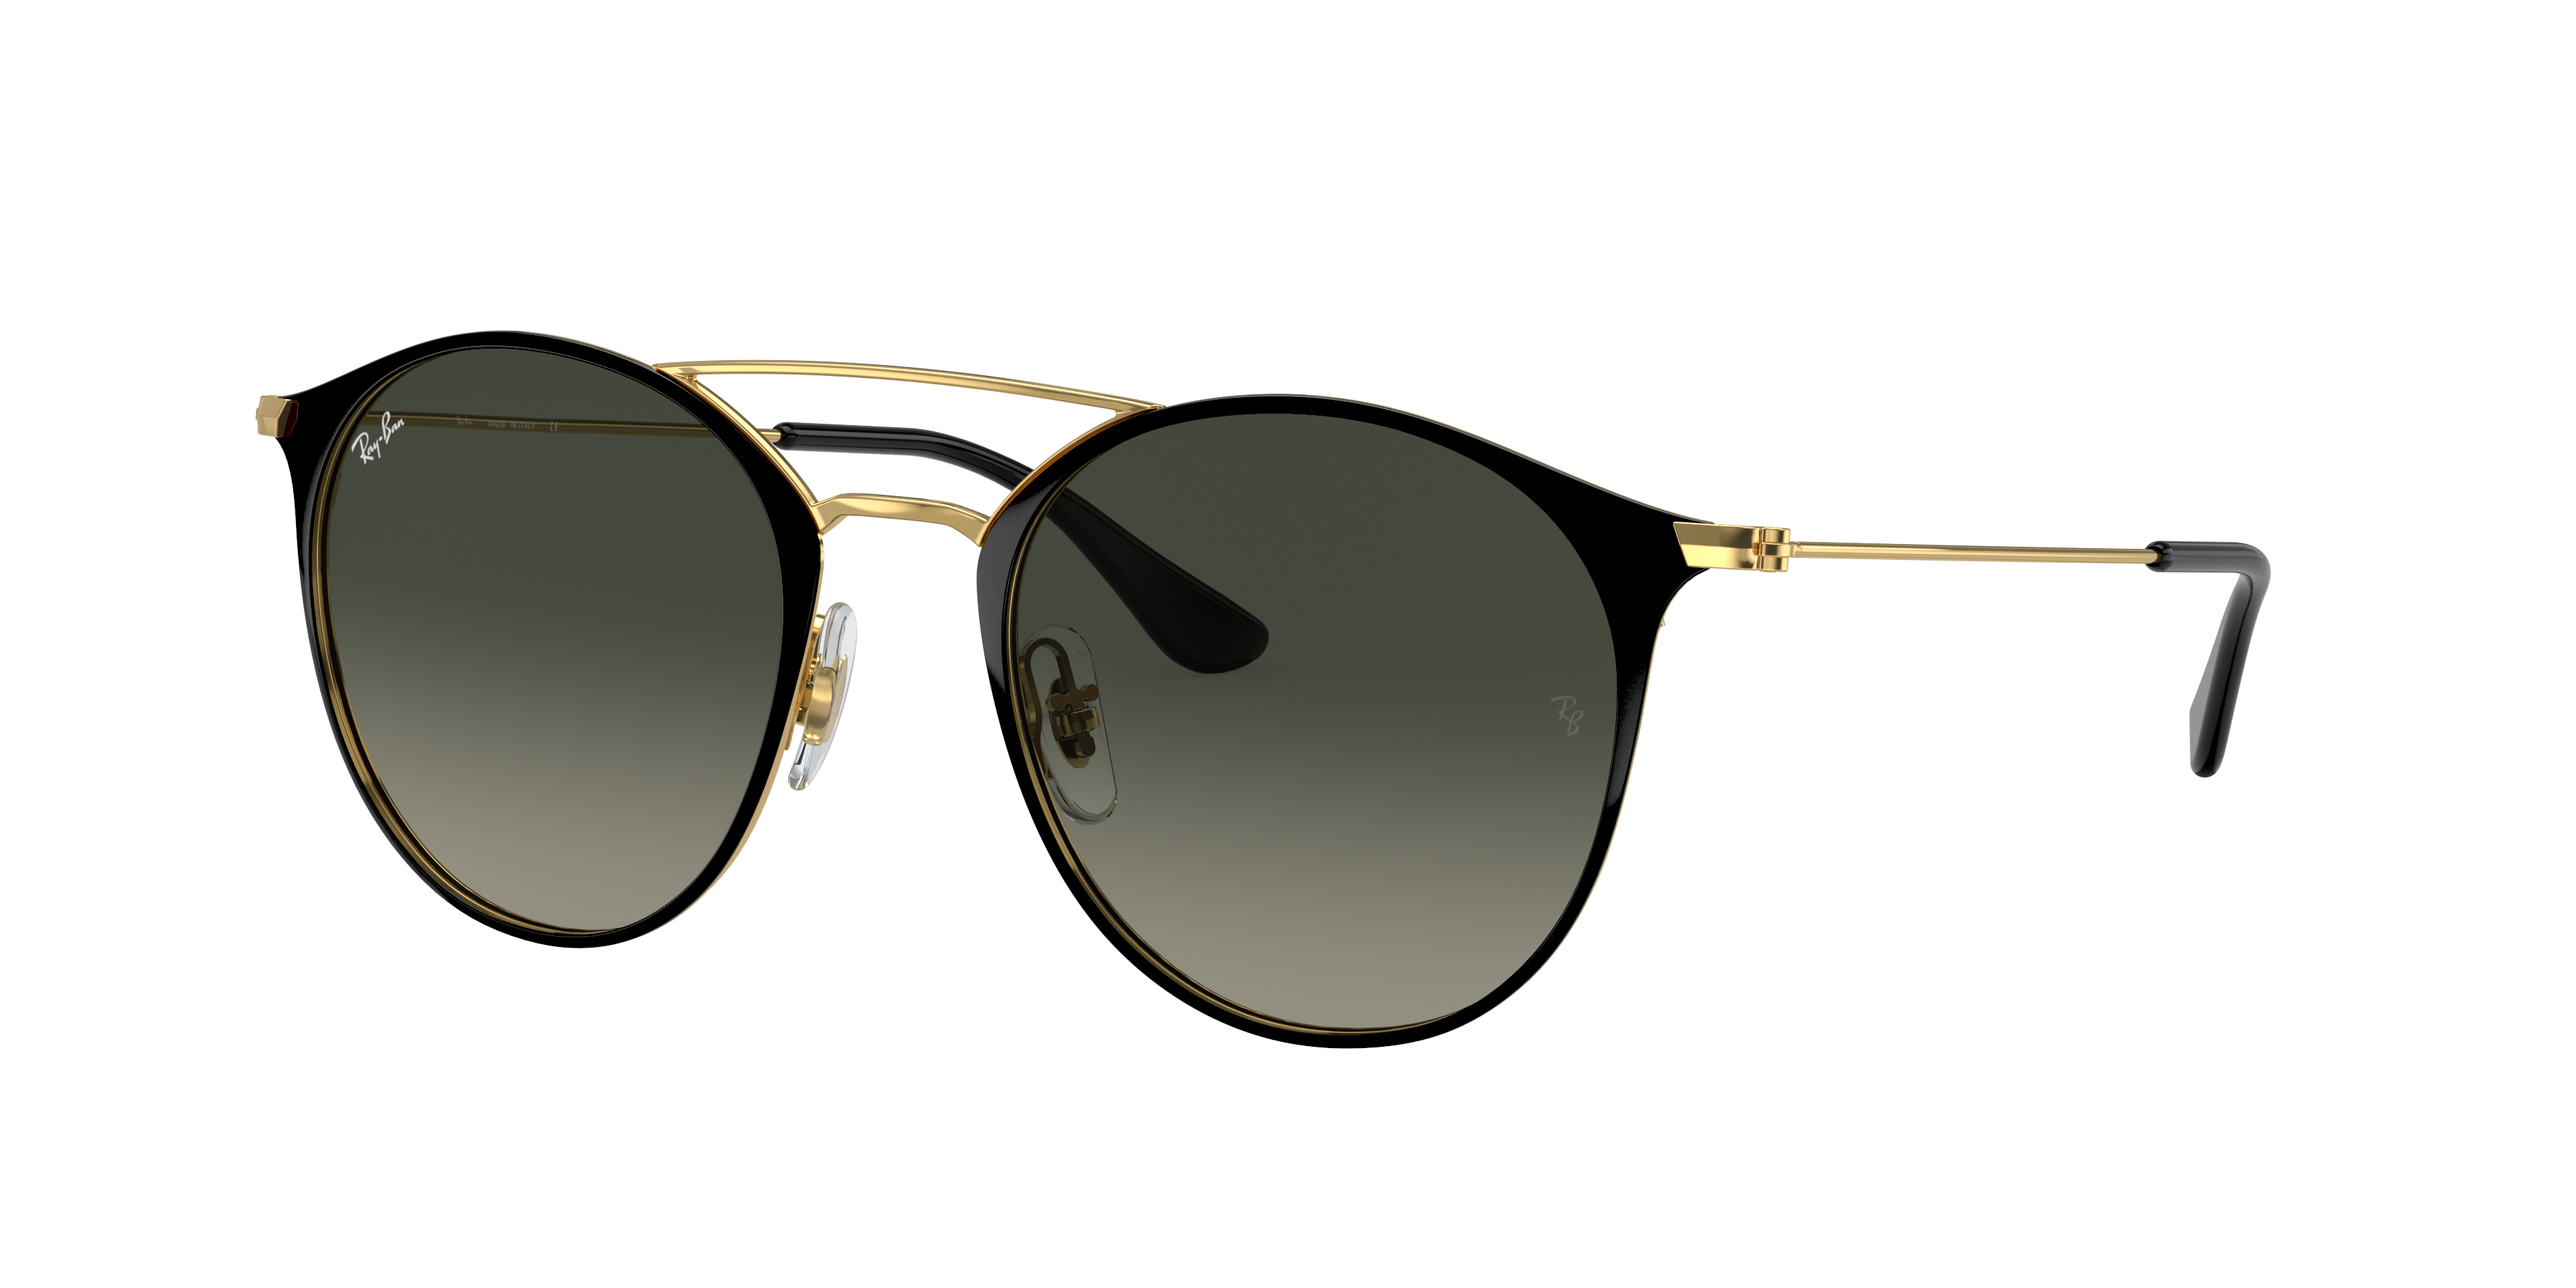 official ray ban stockists uk